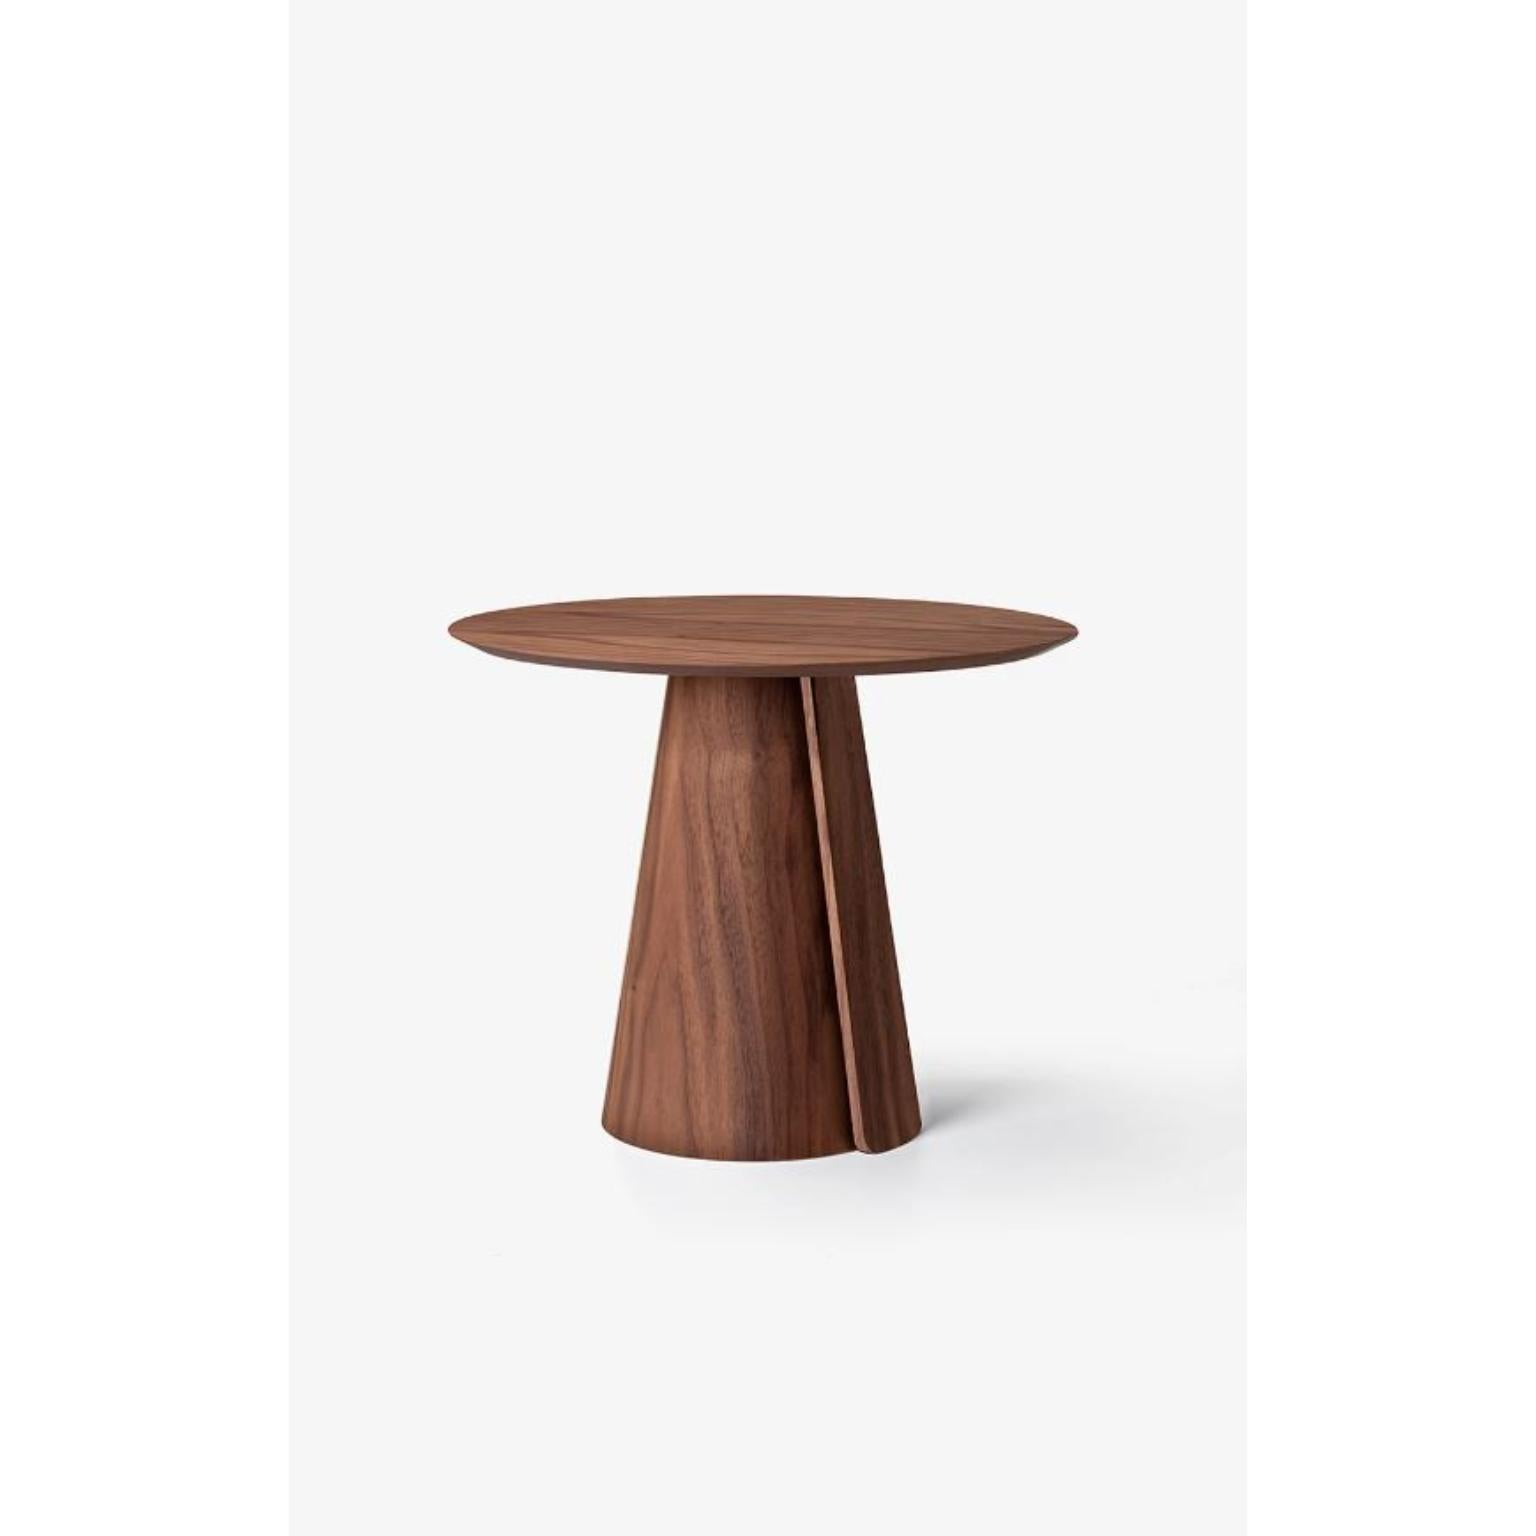 Volta Dining Table 120 by Wentz
Dimensions: D 120 x W 120 x H 75 cm
Materials: Wood, Plywood, MDF, Natural Wood Veneer, Steel.
Weight: 85kg / 187 lbs

The Volta table references nature in its impermanence. The detail on the base suggests natural